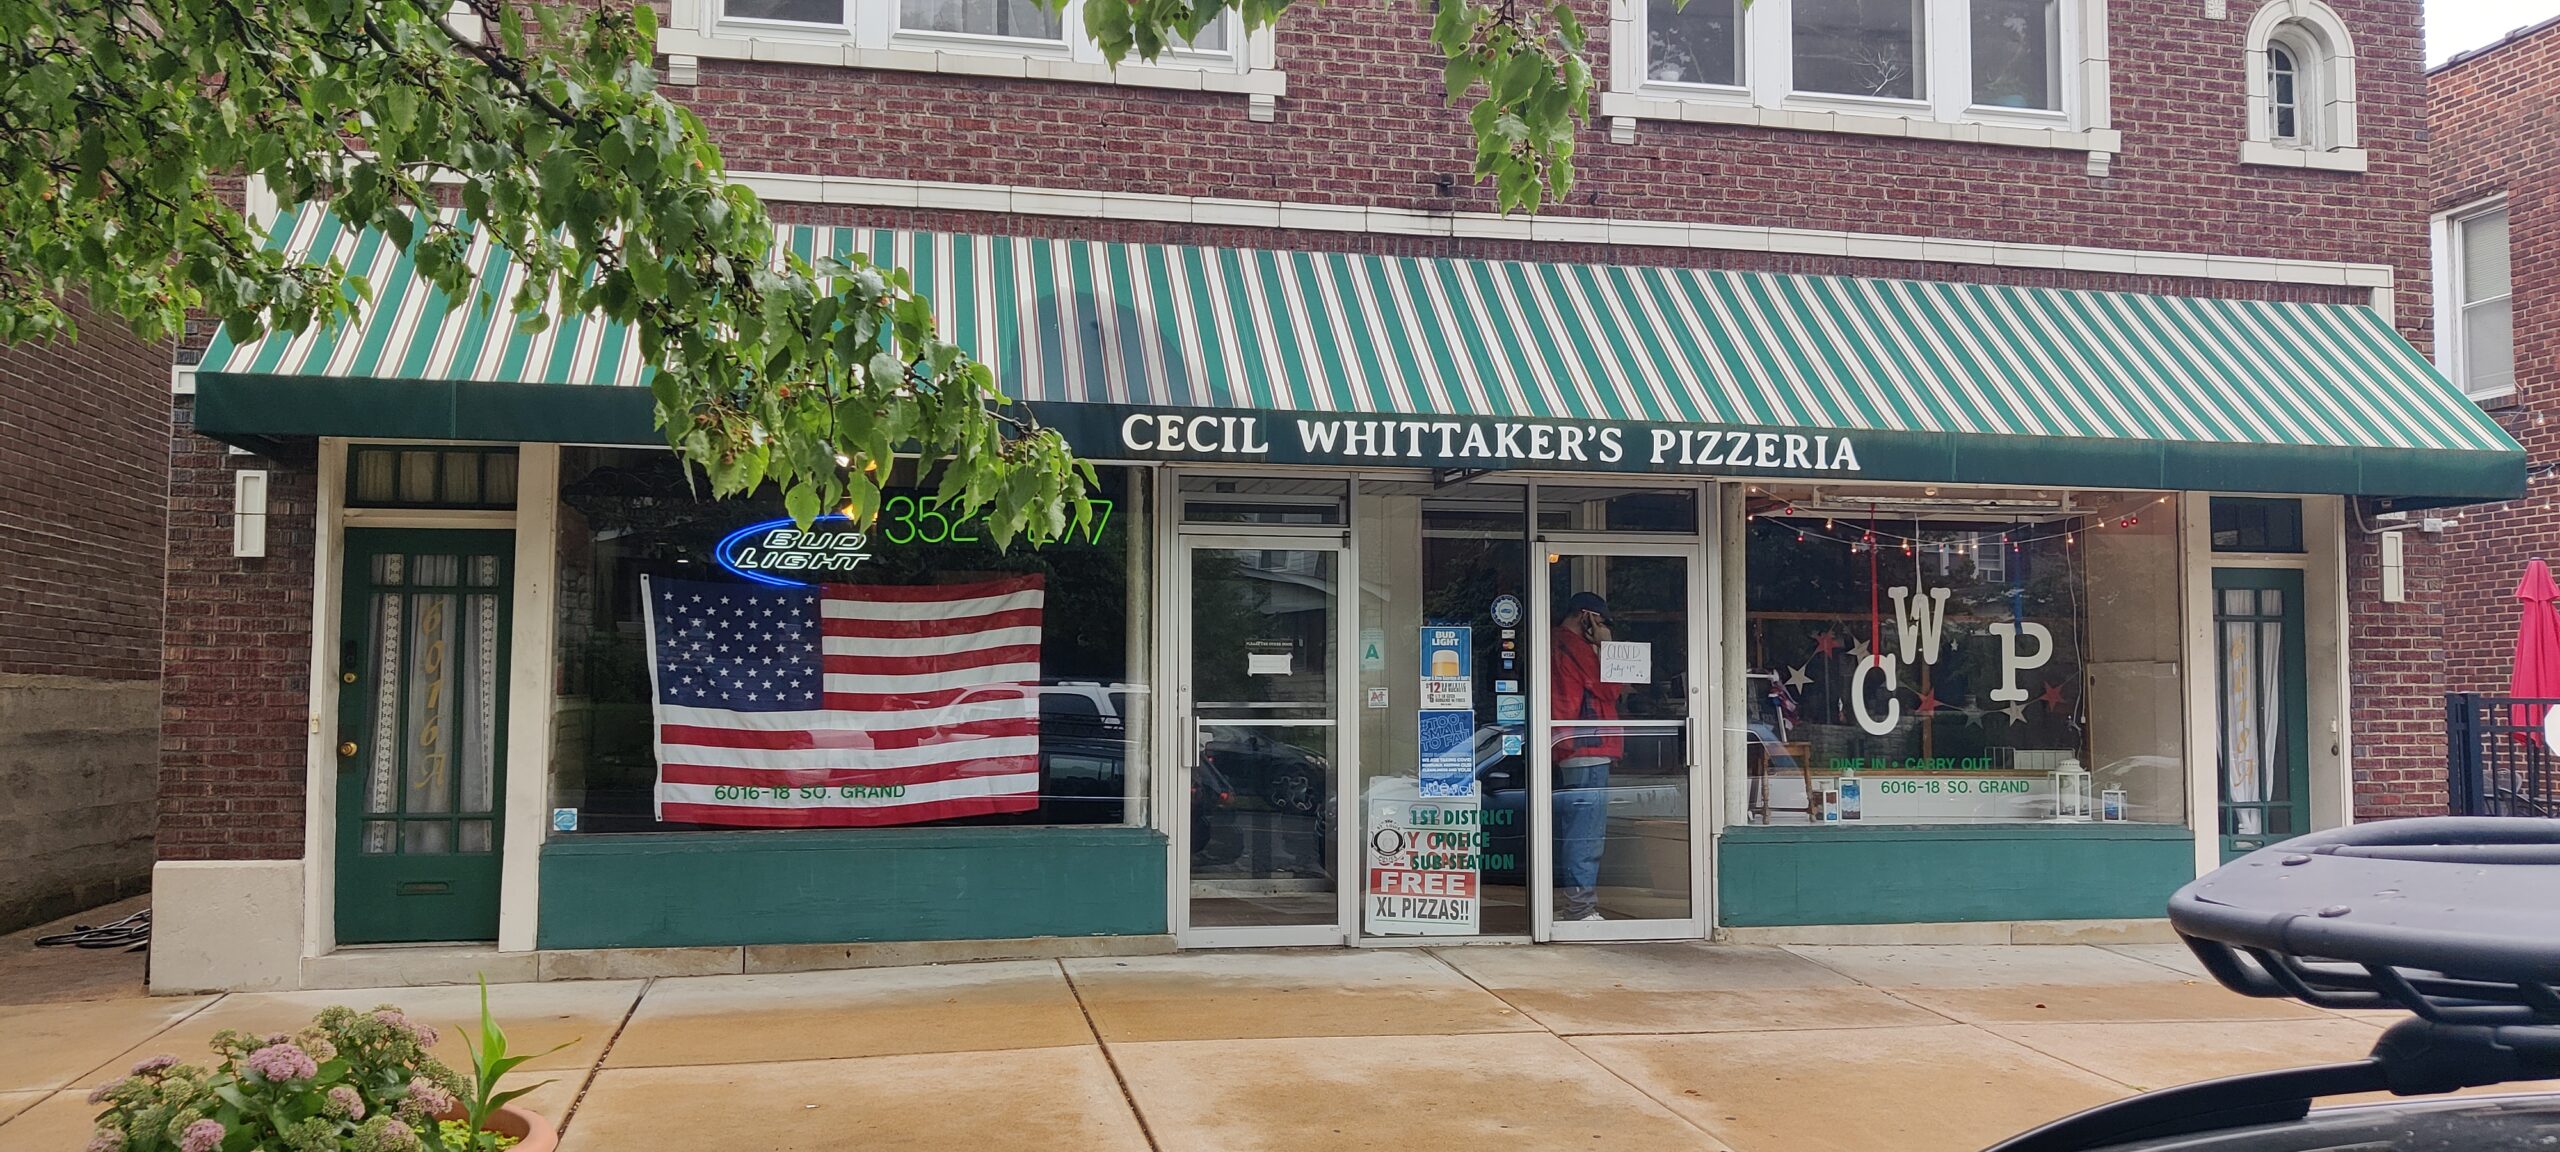 Facade of Cecil Whitaker's on South Grand